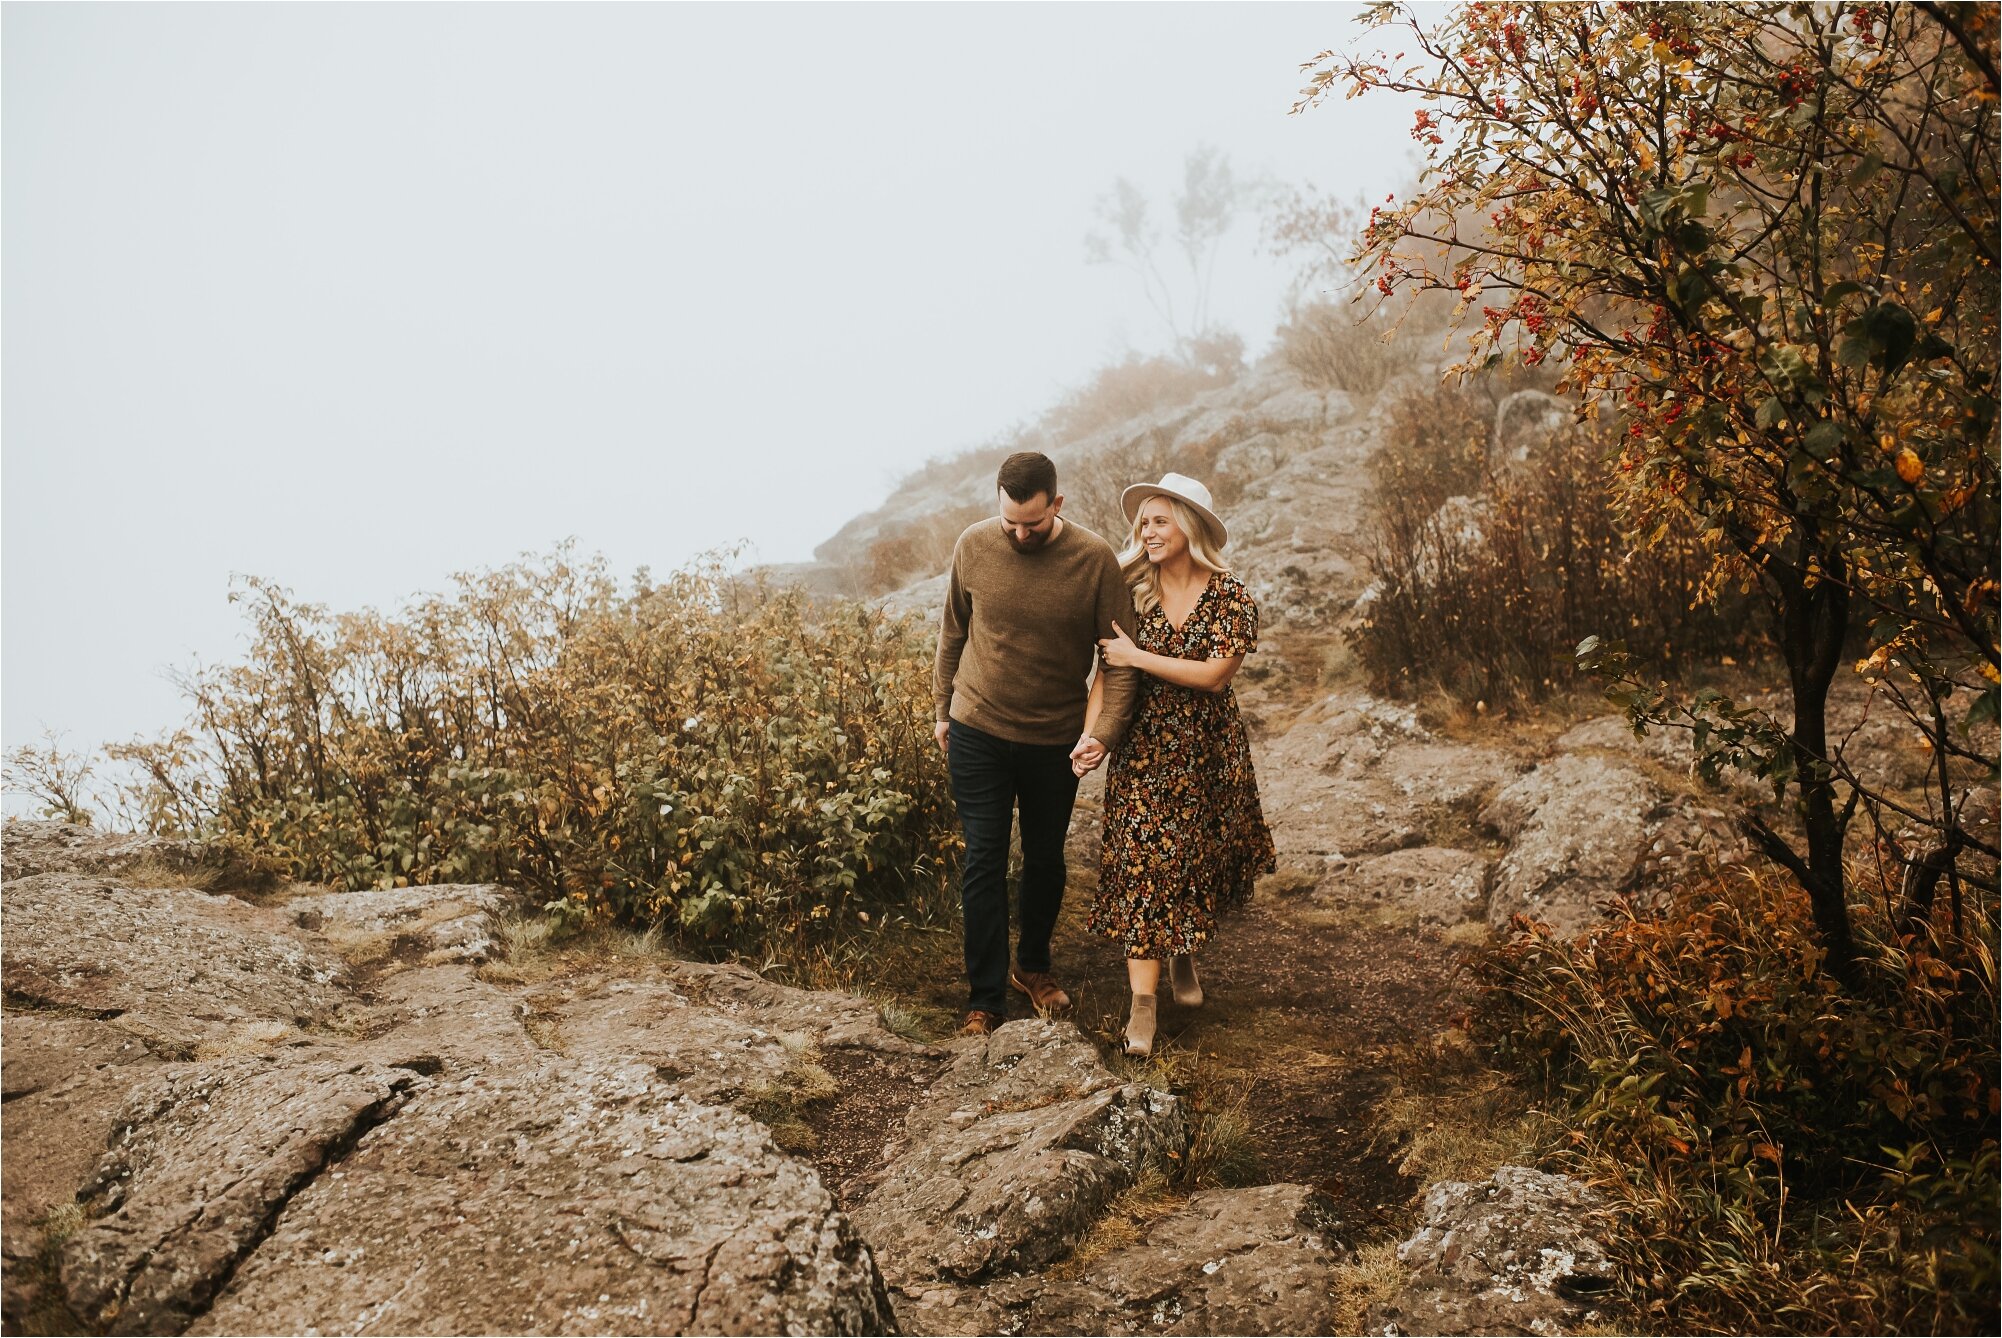  north shore minnesota engagement session engaged palisade head couple walking outfit 